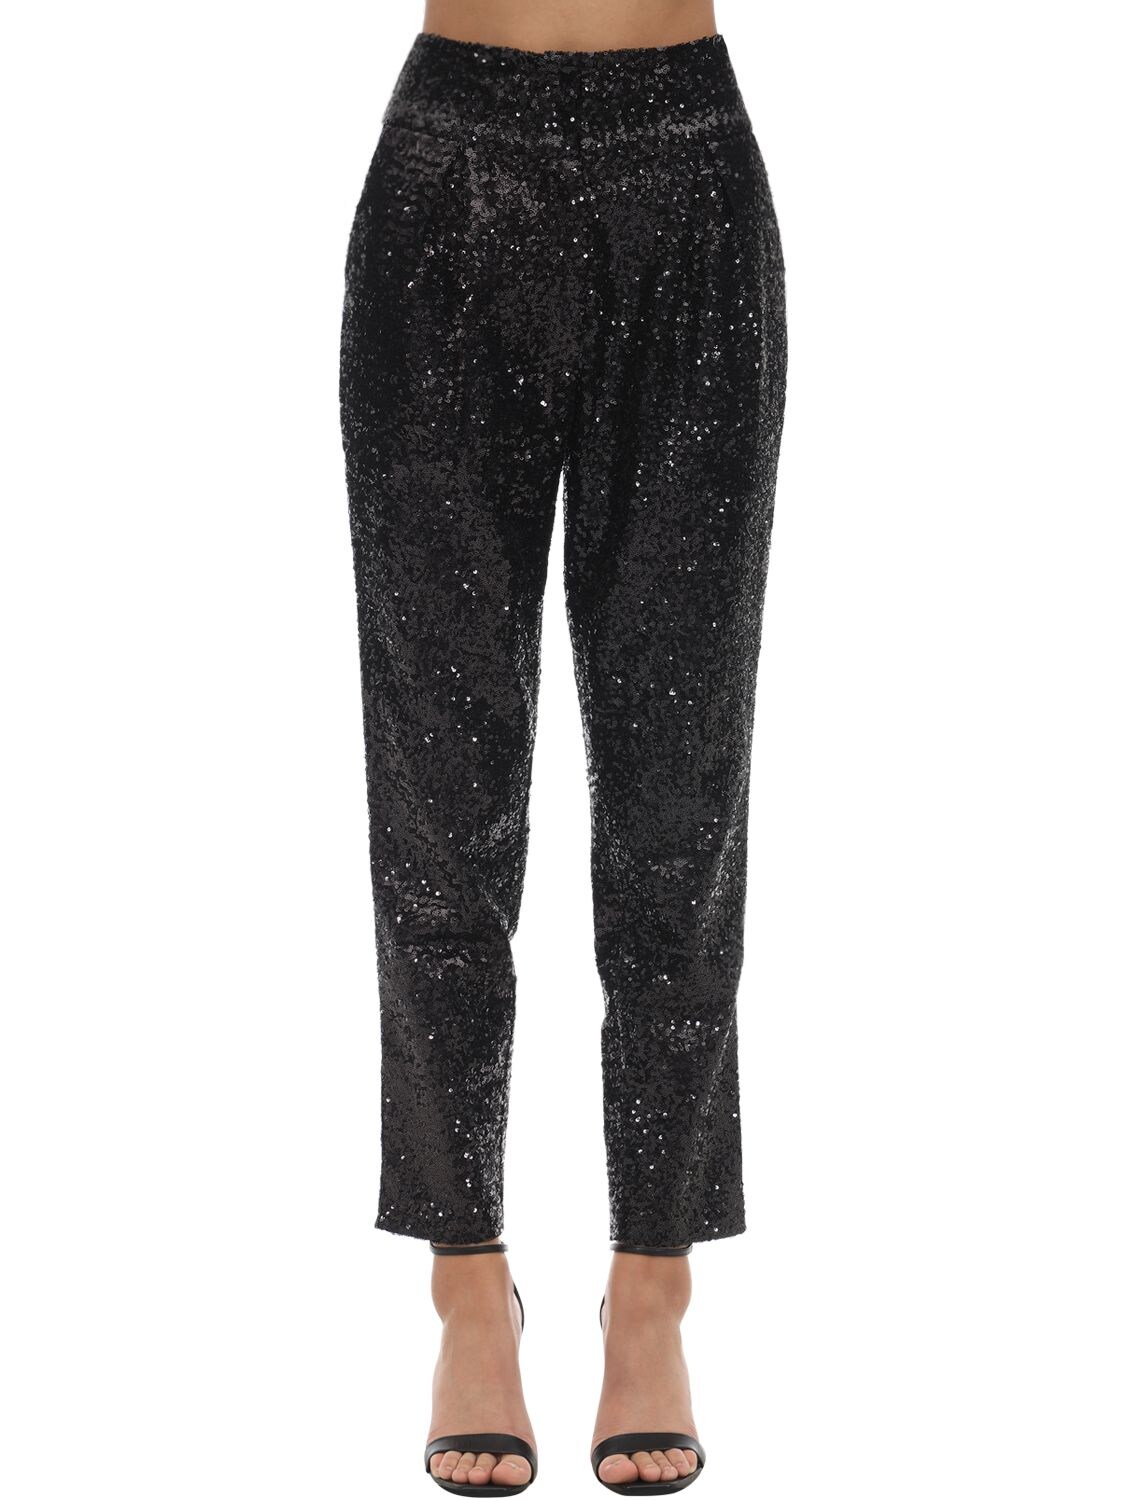 IN THE MOOD FOR LOVE HIGH WAIST SEQUINED PANTS,71IXKL012-QKXBQ0S1